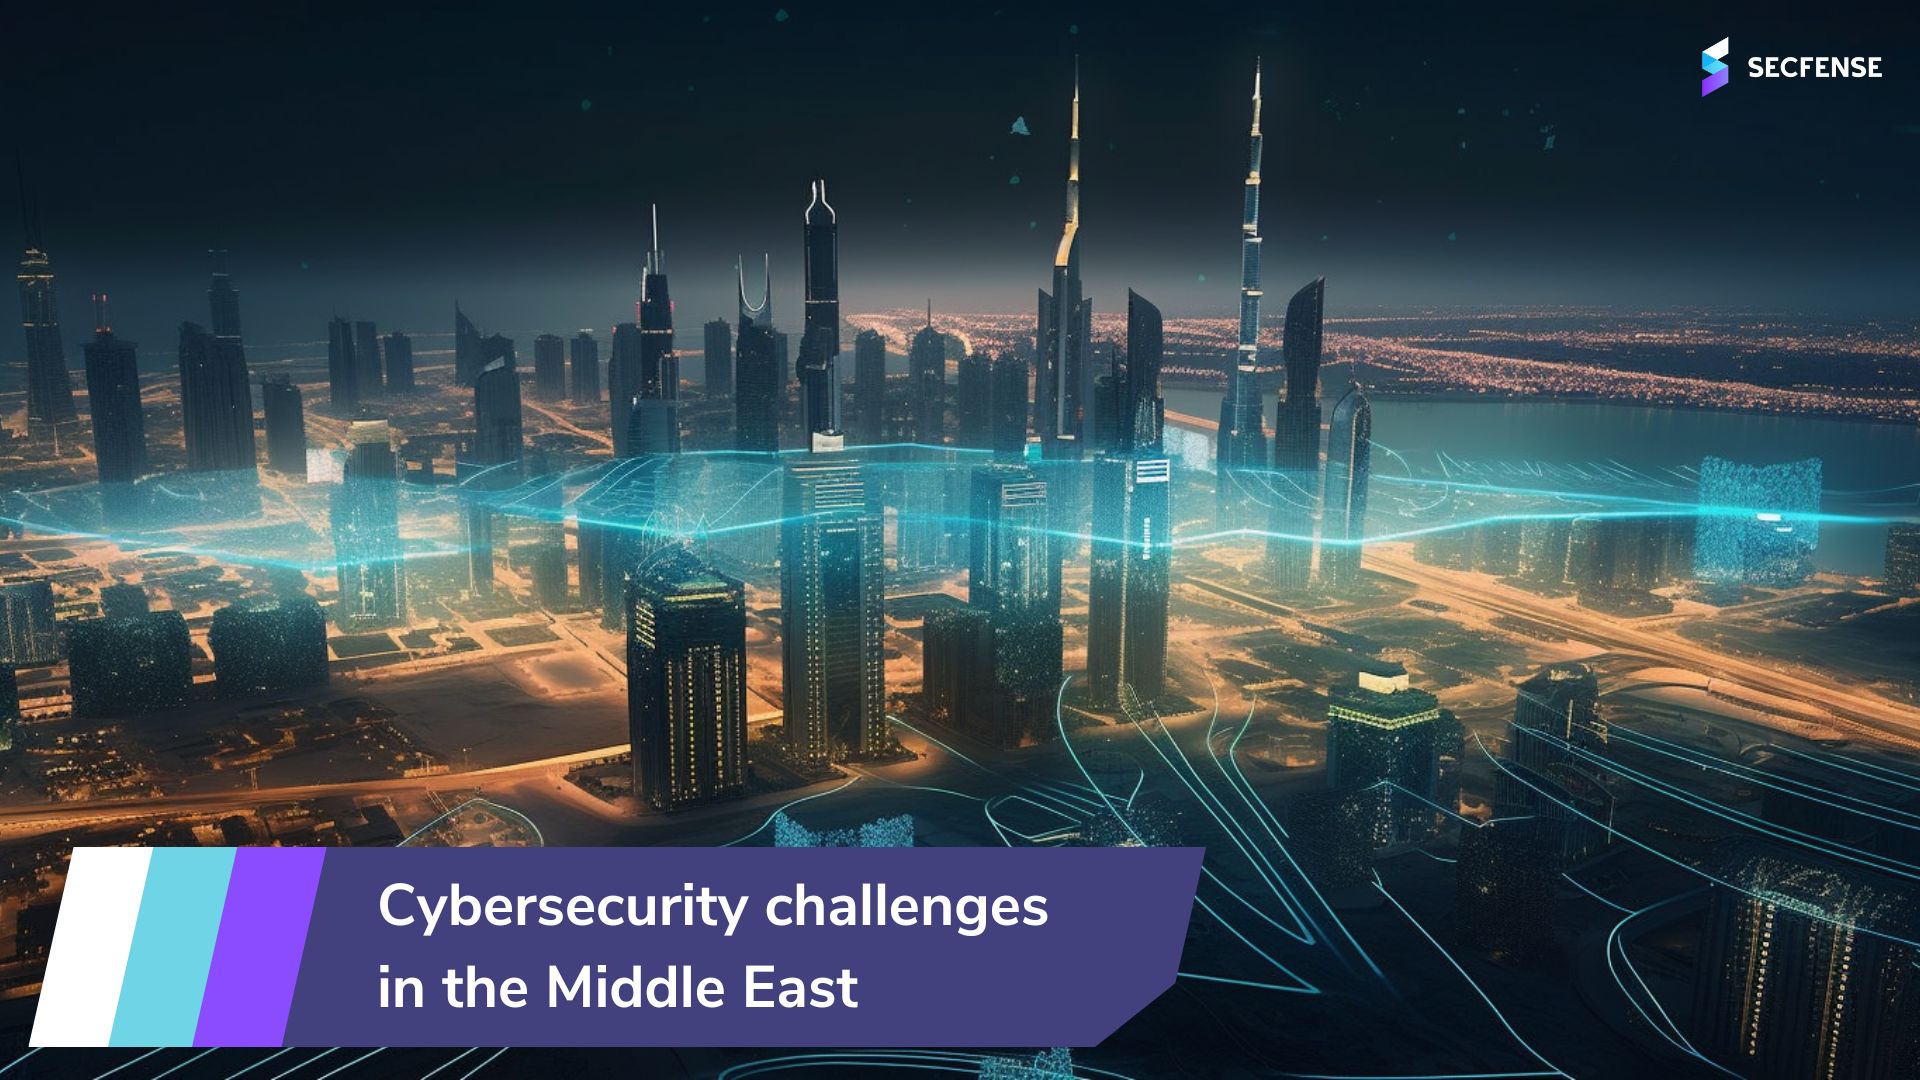 Cybersecurity challenges in the Middle East